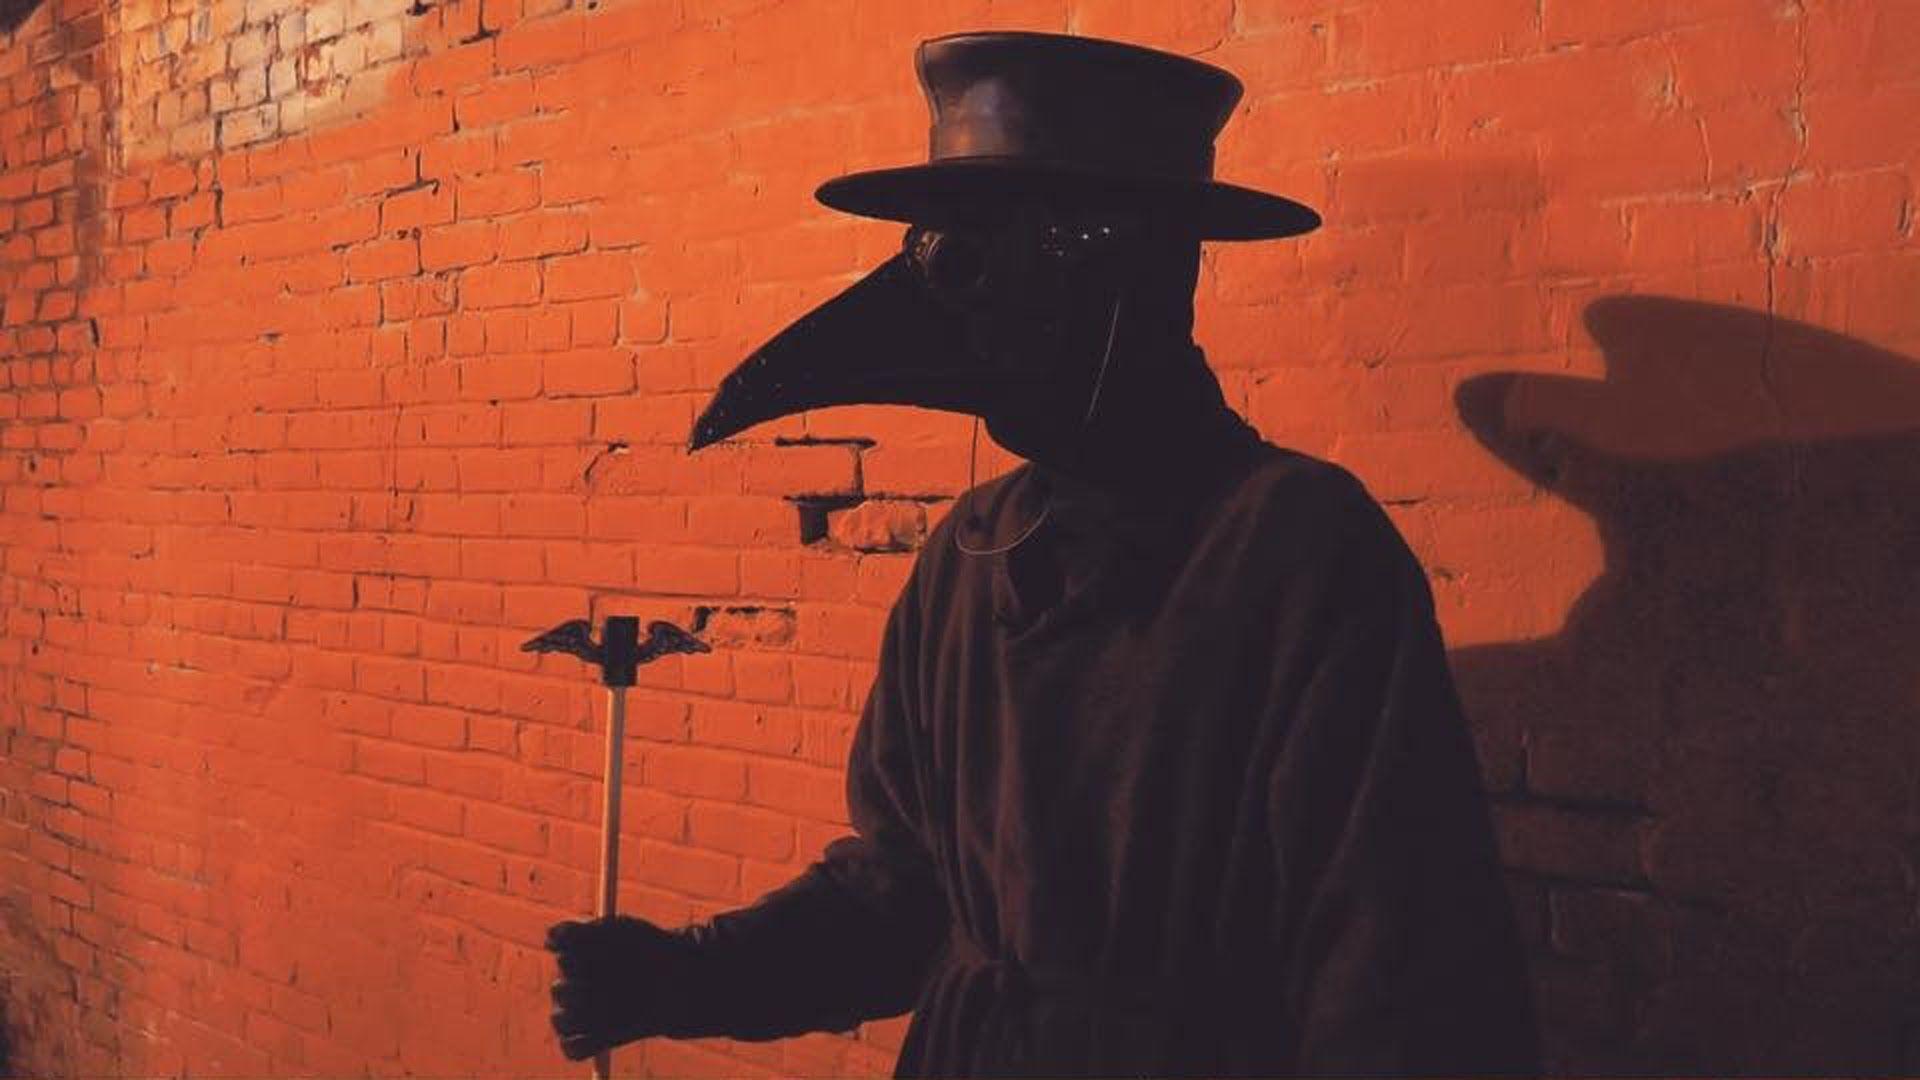 Plague Doctor Wallpapers High Quality Download Free.